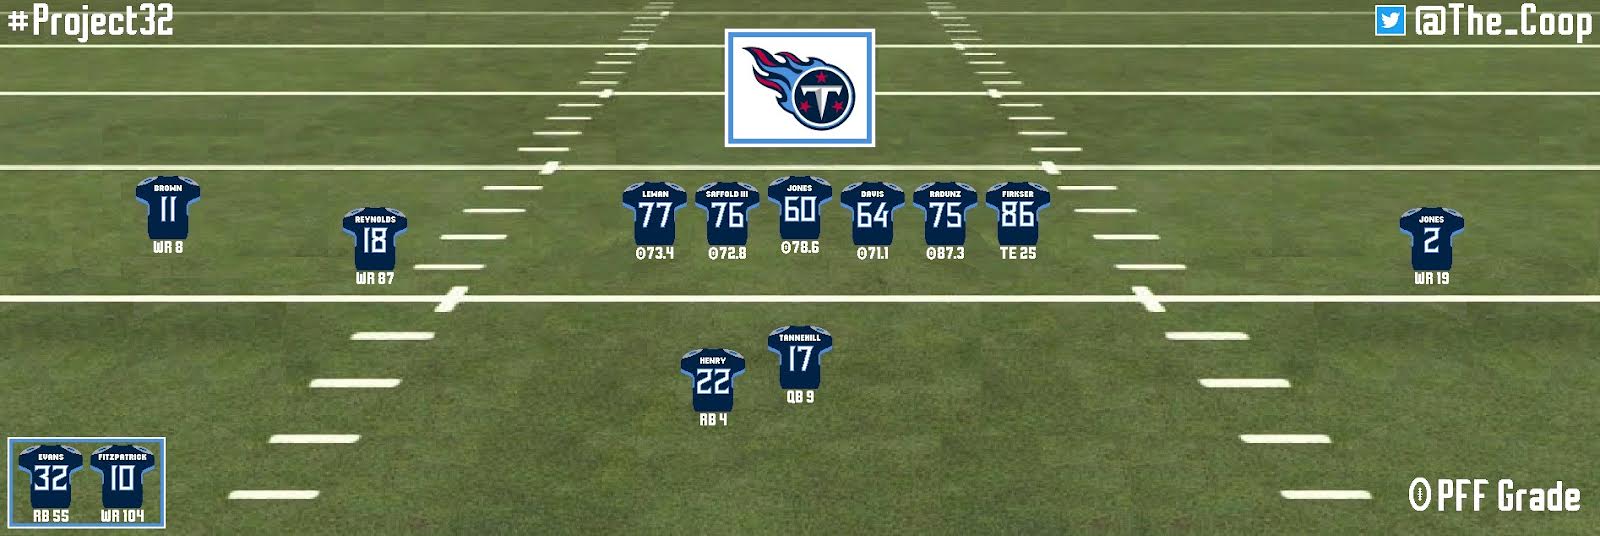 Tennessee Titans 2021 projections